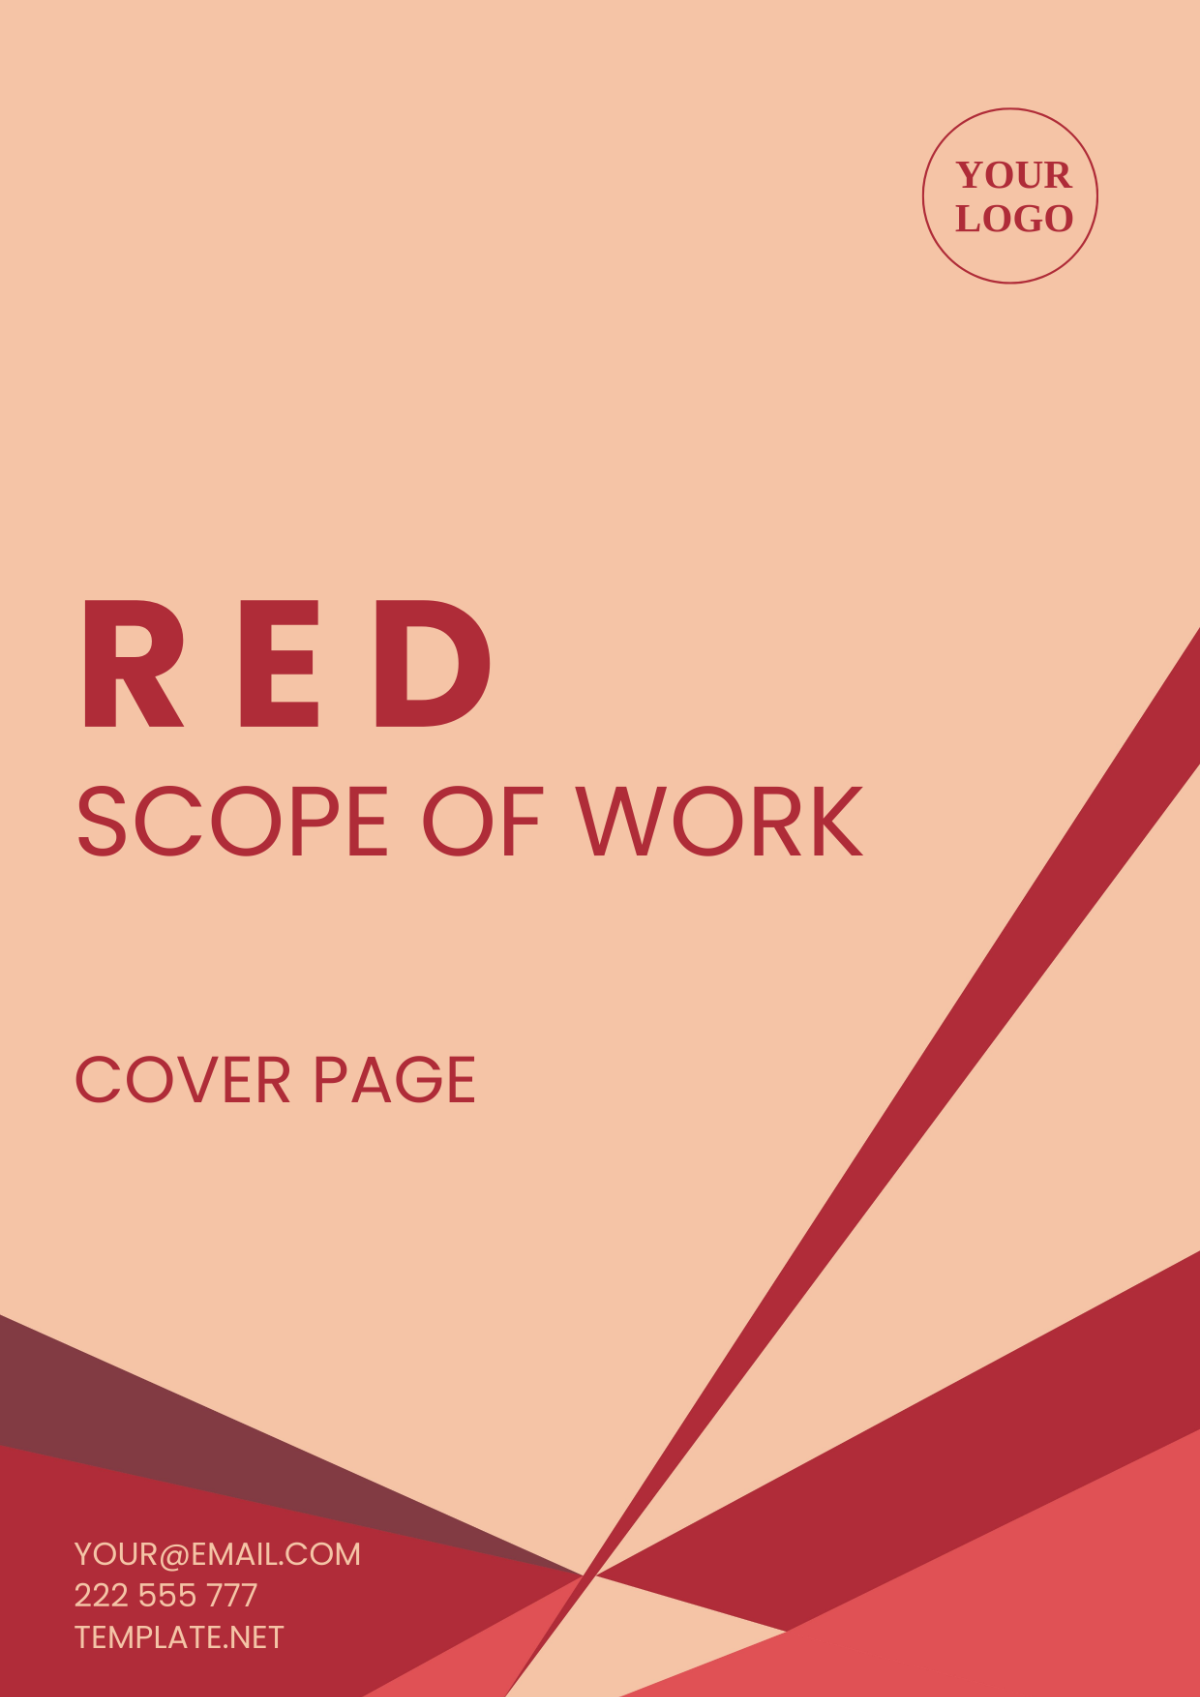 Red Scope of Work Cover Page Template